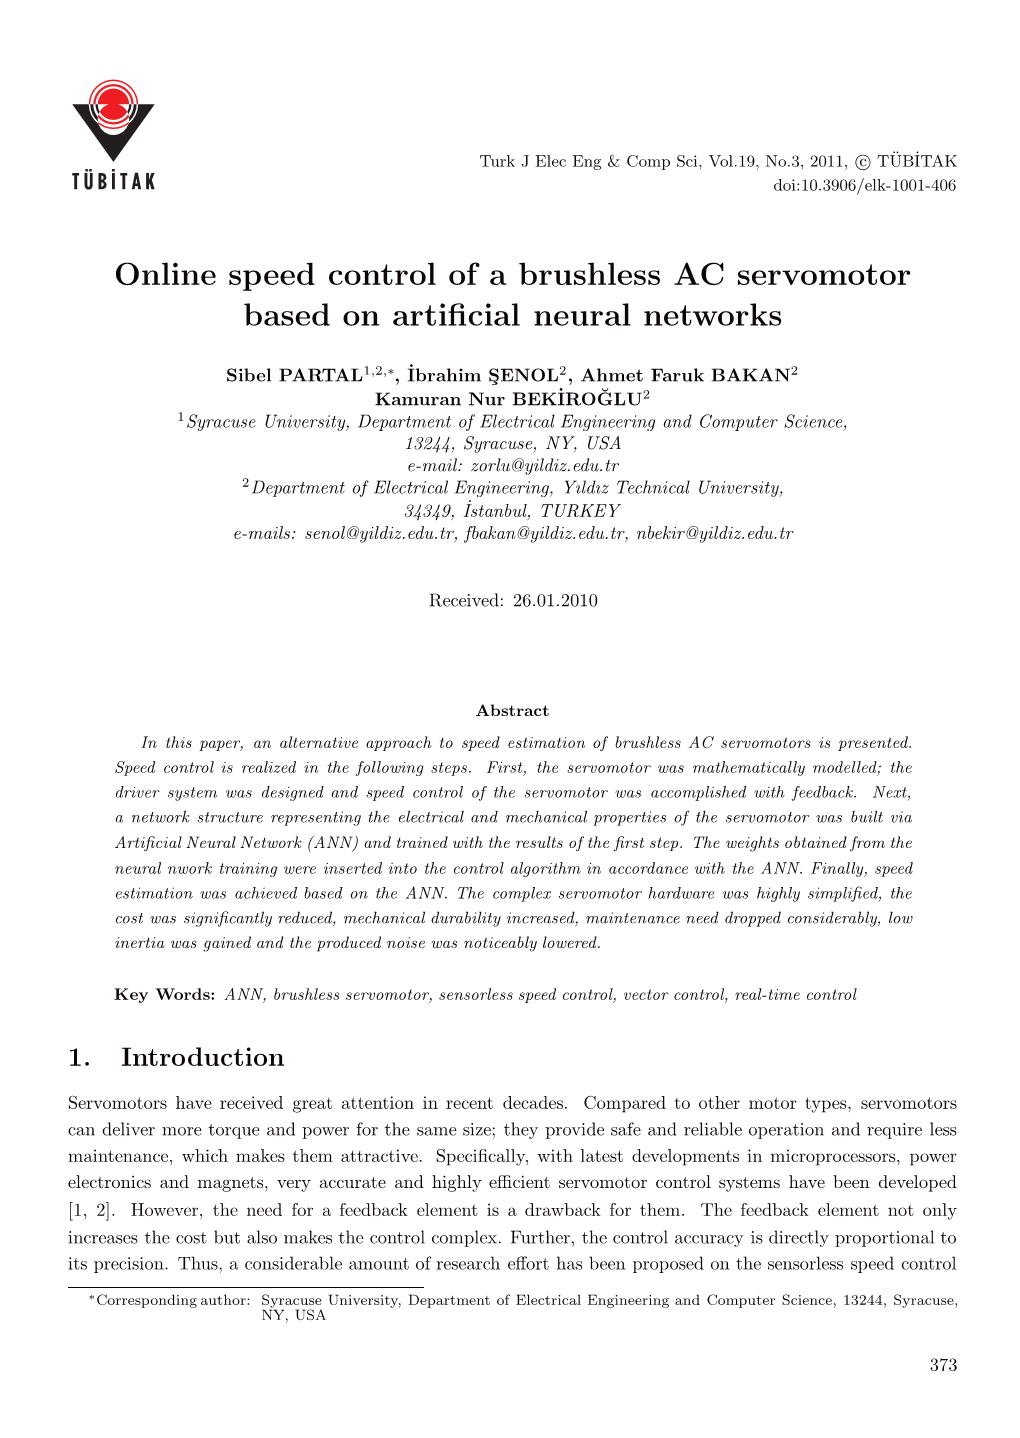 Online Speed Control of a Brushless AC Servomotor Based on Artificial